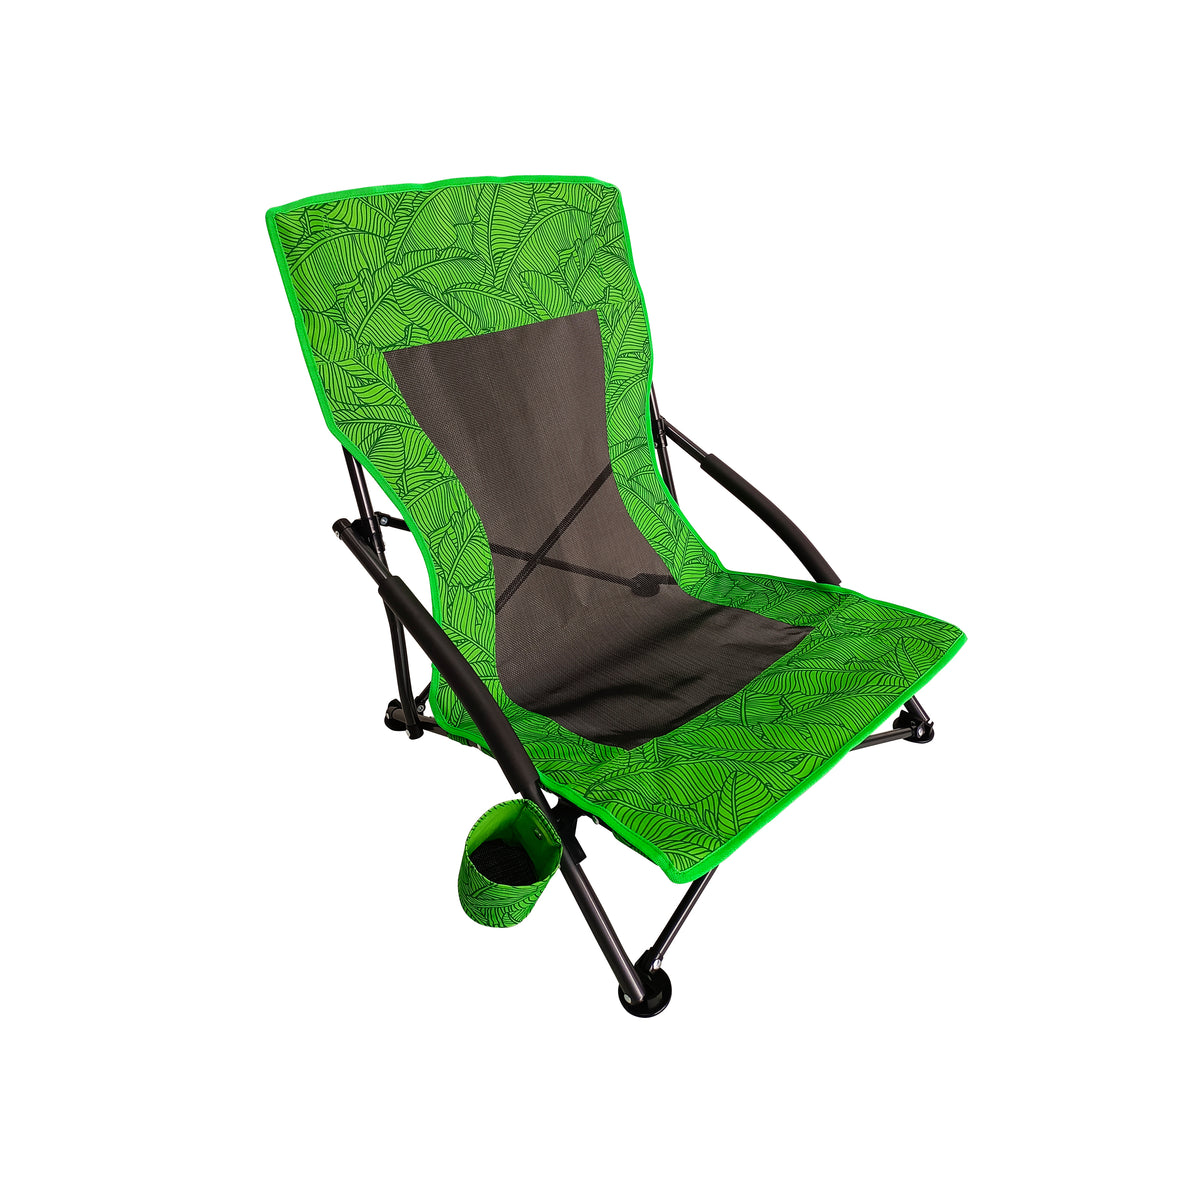 Bliss Hammocks Collapsible Beach Chair with Cup Holders. Green Banana Leaves Variation is a vibrant green color with a banana leaf pattern.